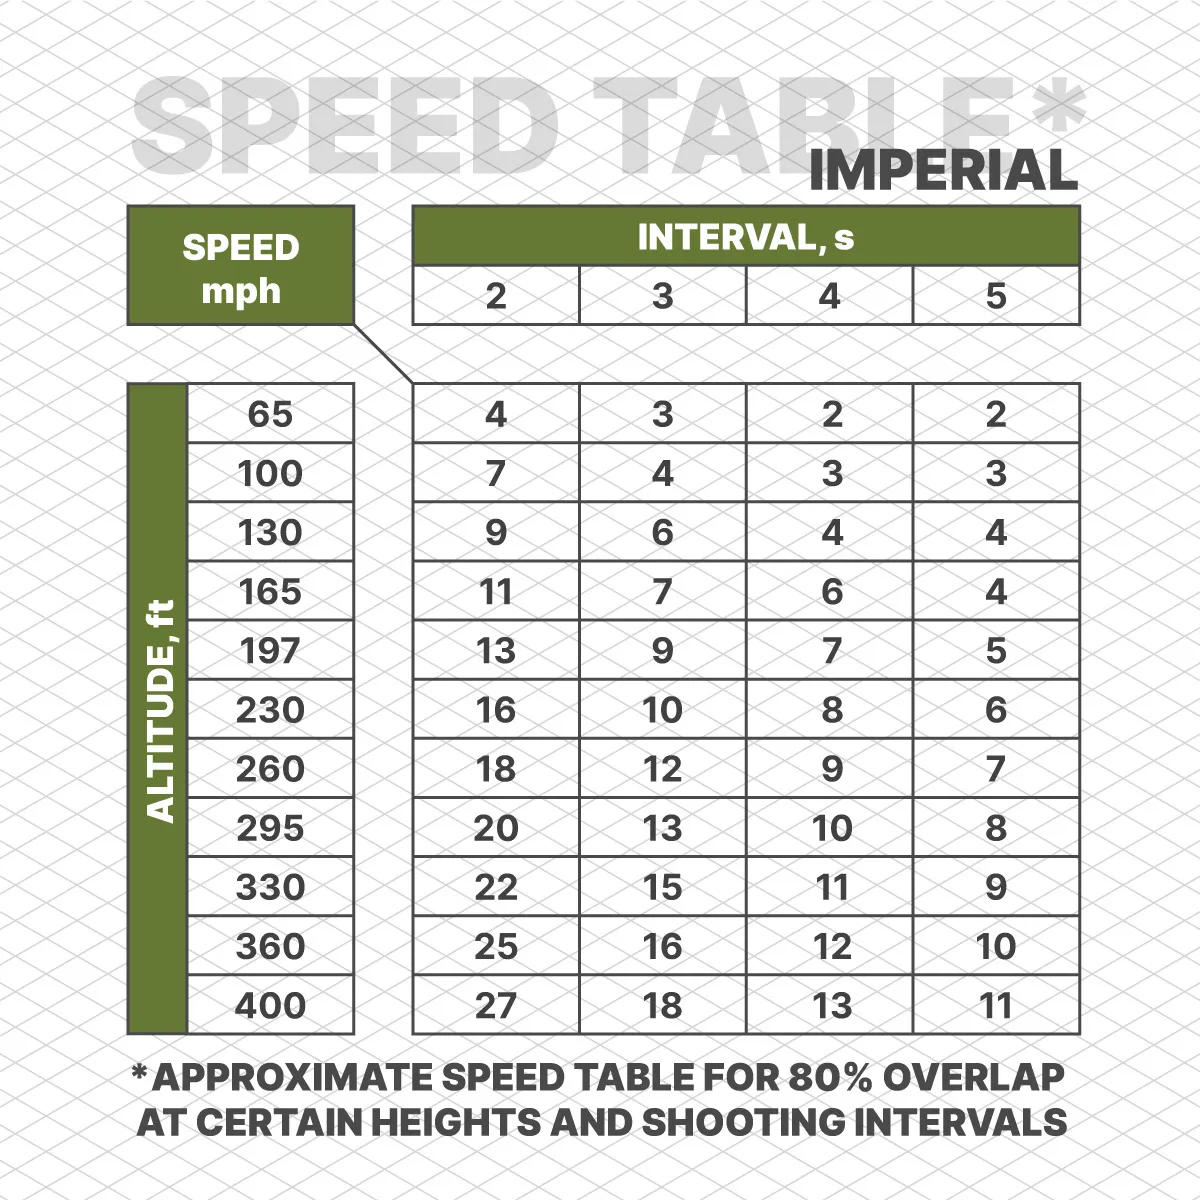 Altitude-Interval-Speed-Table-Imperial